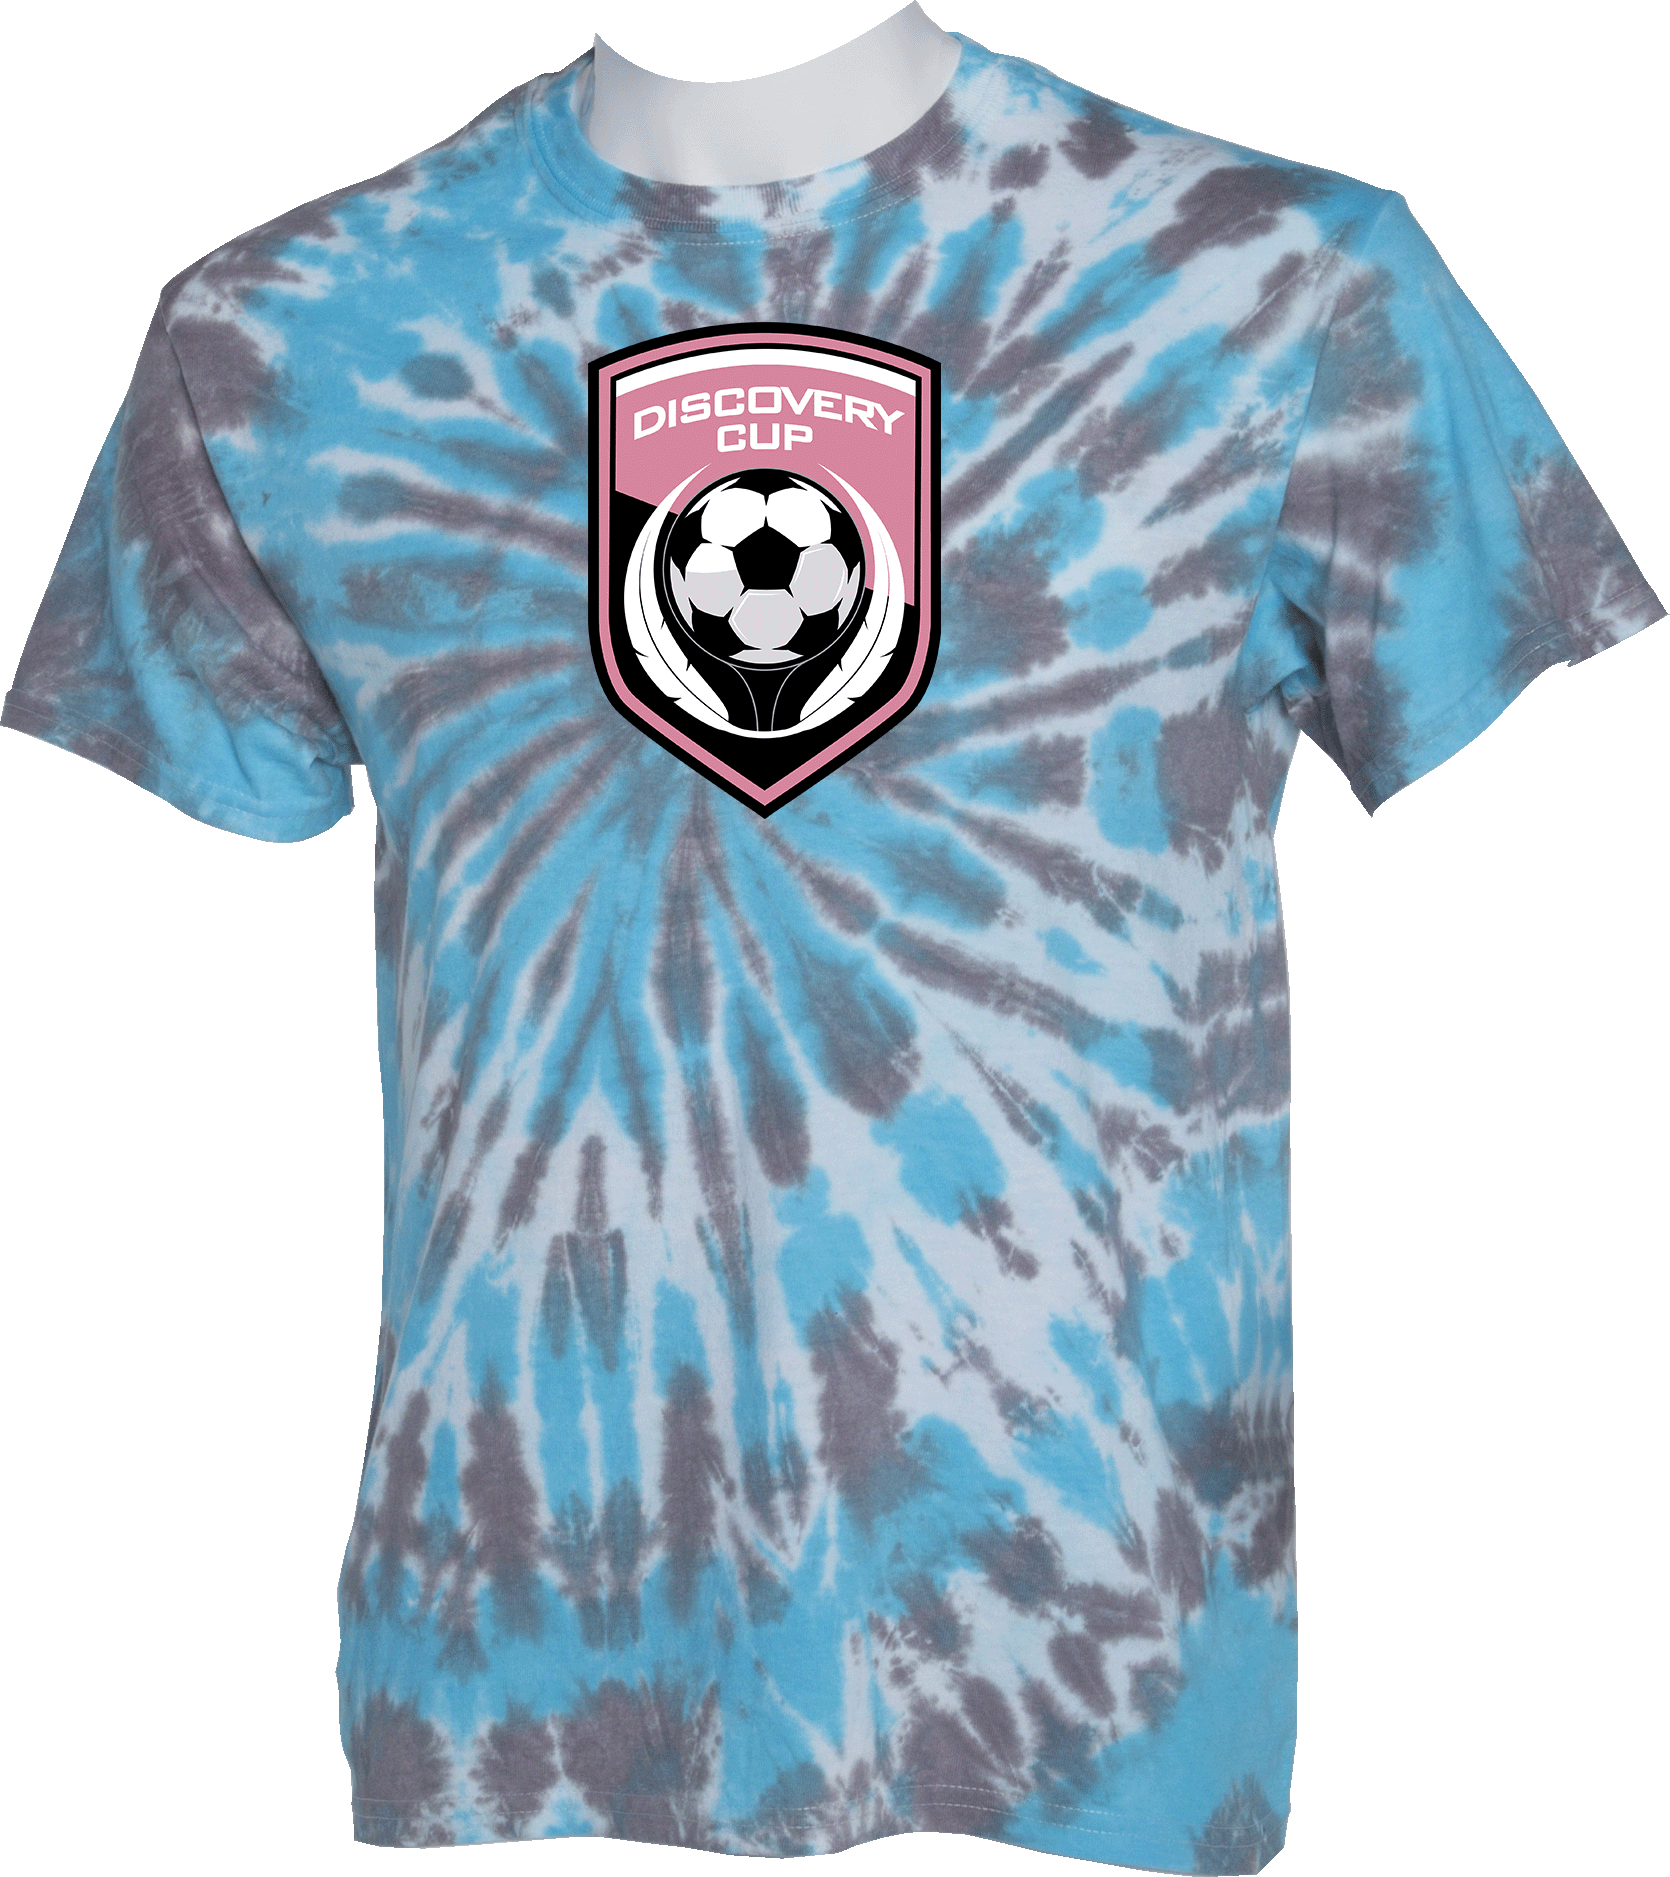 Tie-Dye Short Sleeves - 2023 Discovery Cup